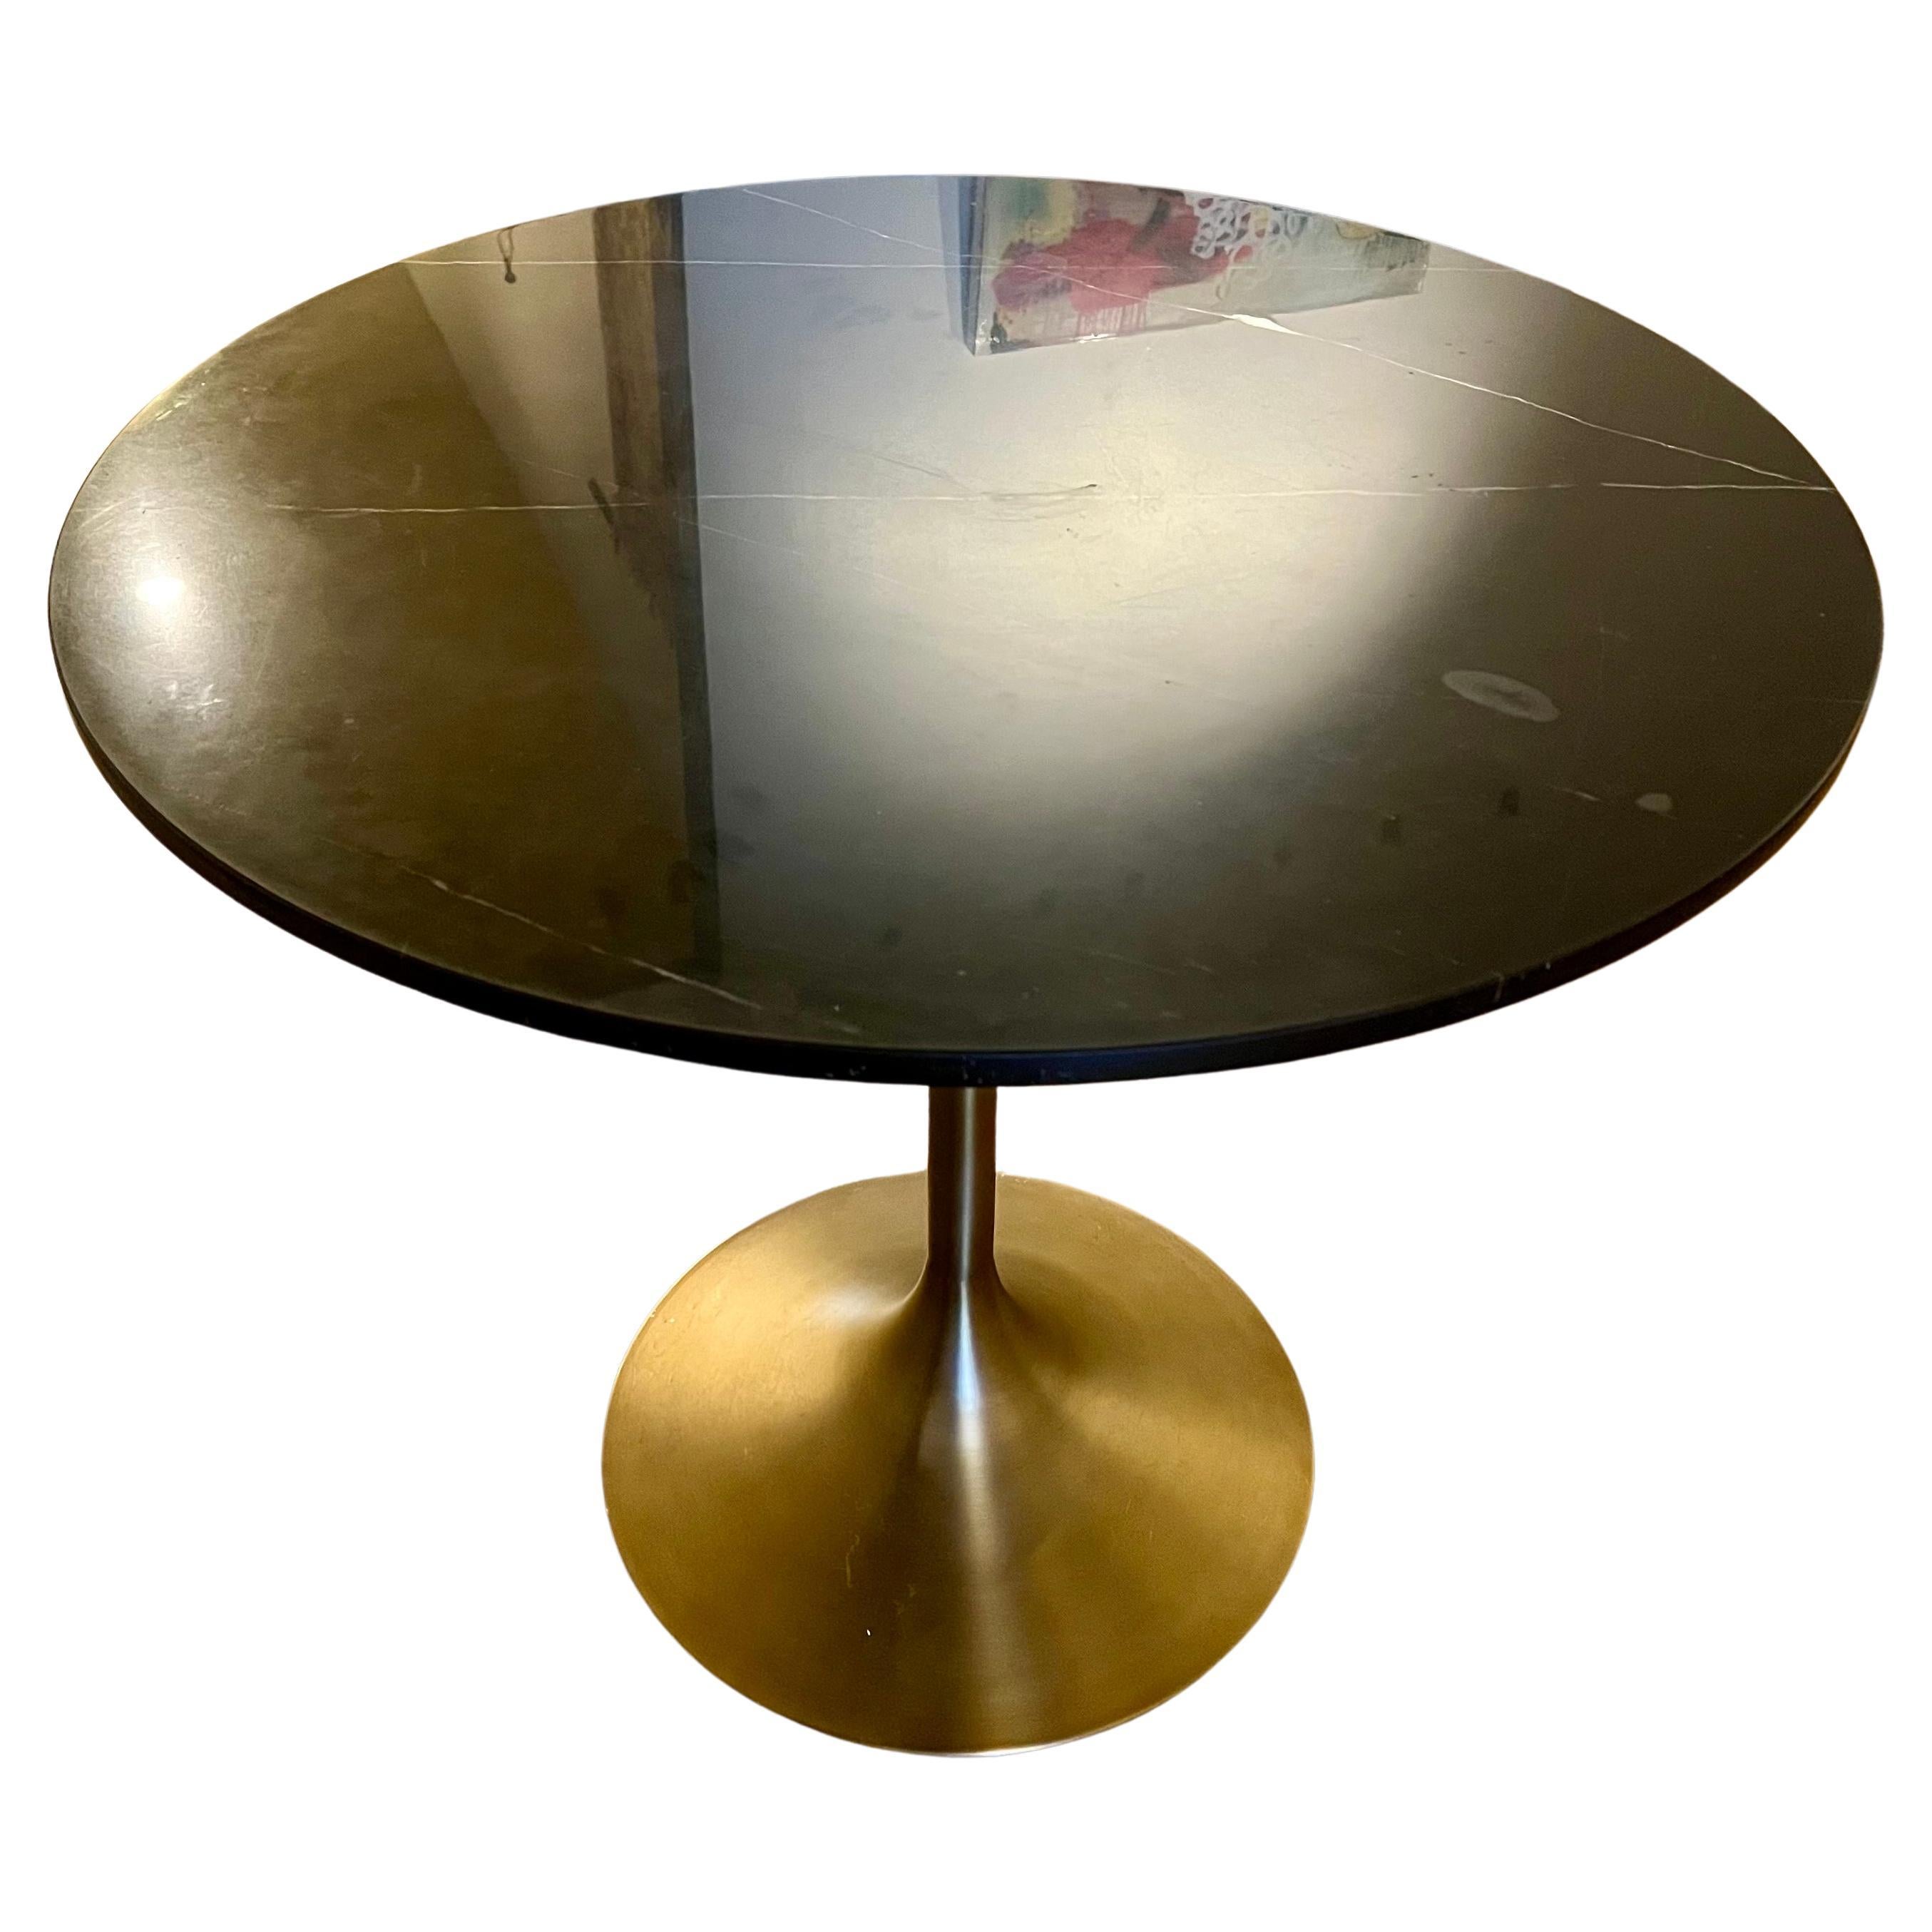 A very good looking black marble top with a Saarinen style base in bronze finish , and metal the top comes off for easy shipping with beautiful grain some light spots due to age as shown , co chips or cracks, very clean overall with light marks